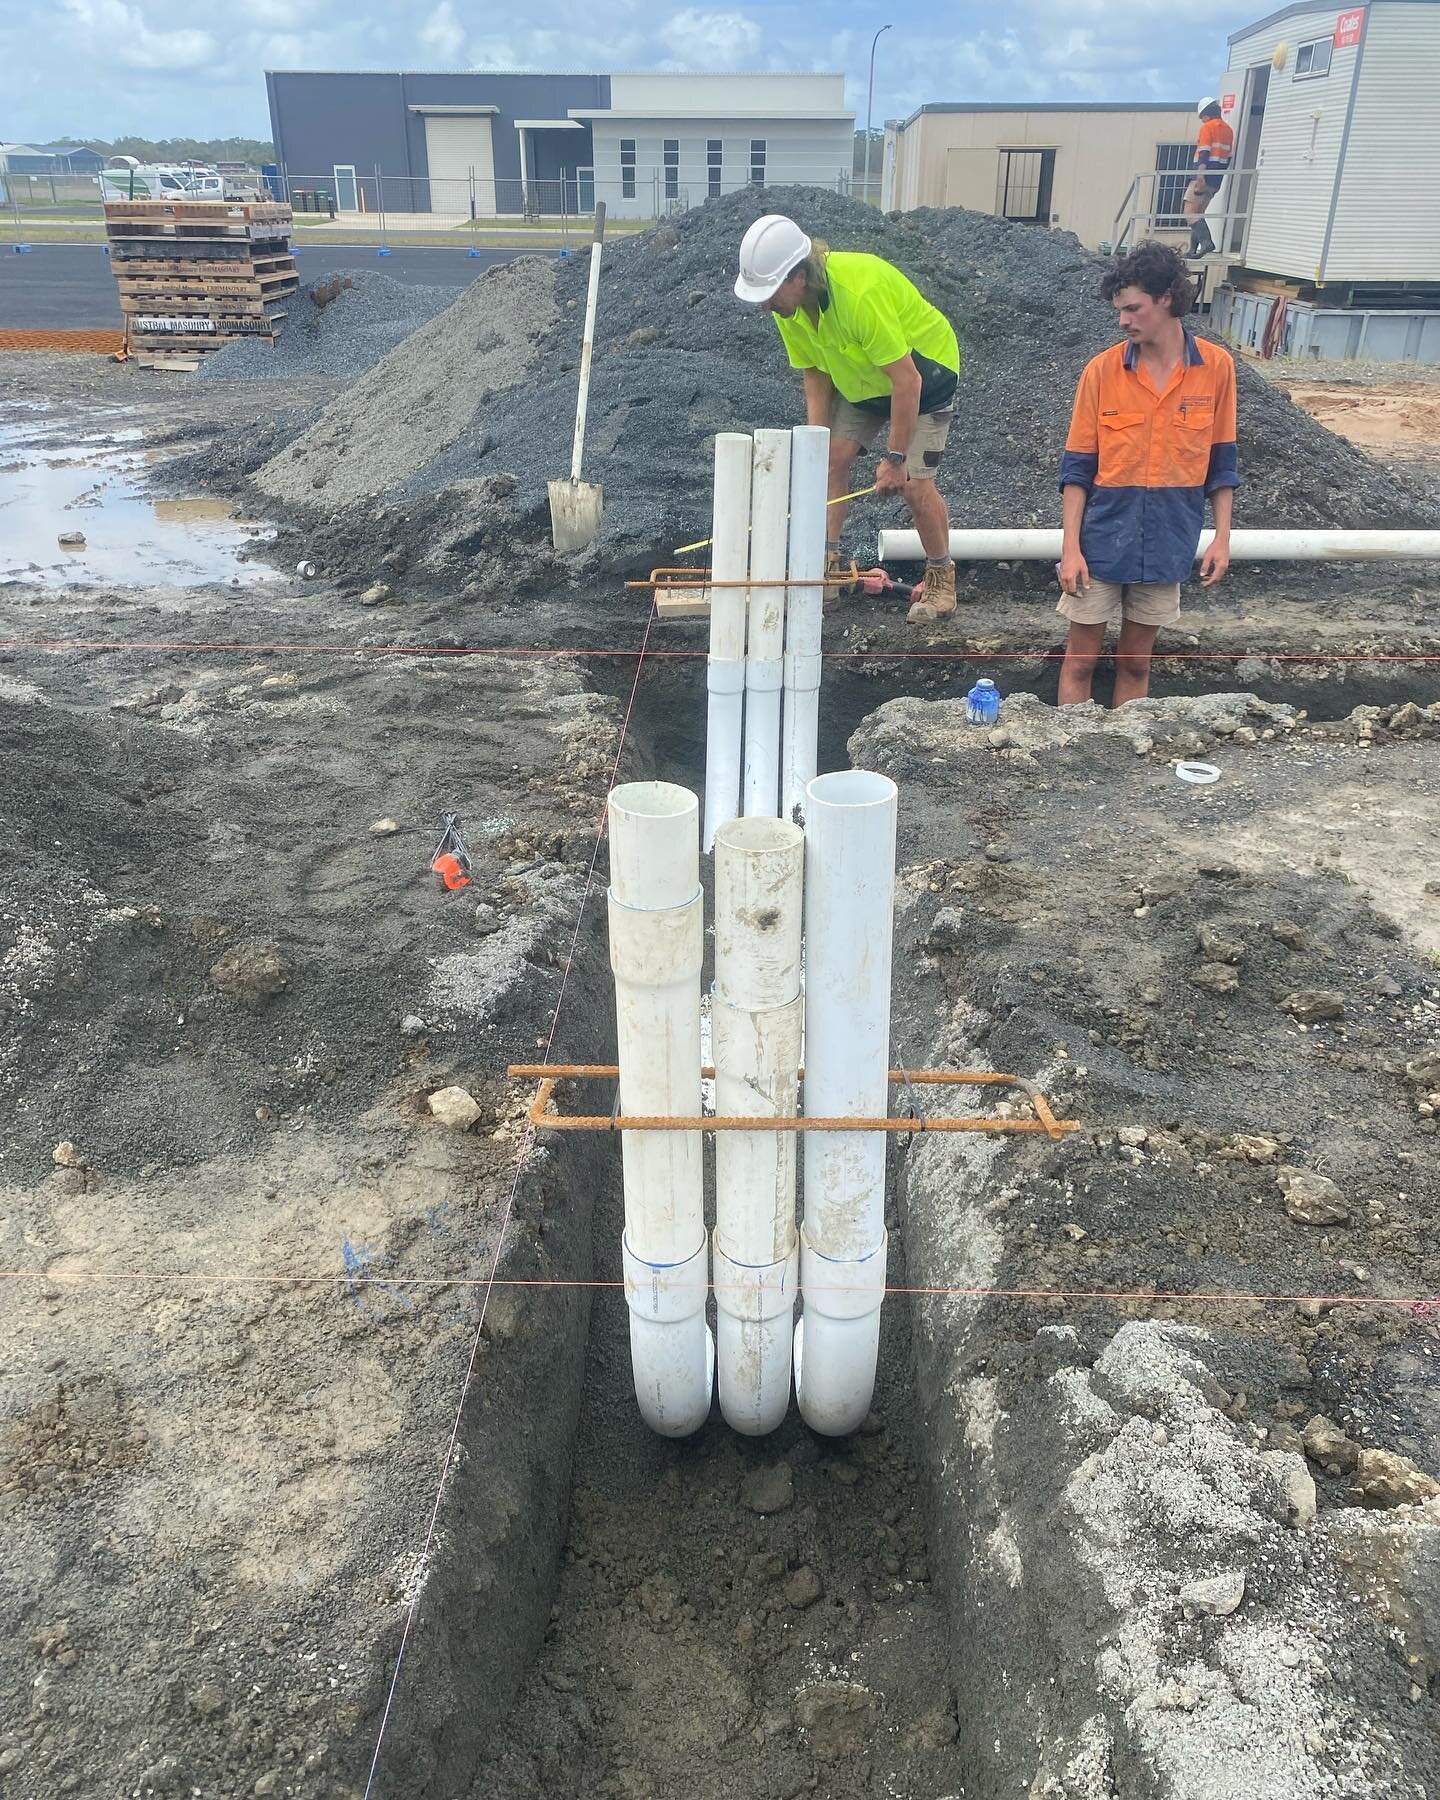 A big week for the team completing another leading edge data centre for @davidpayneconstructions in Coffs Harbour.